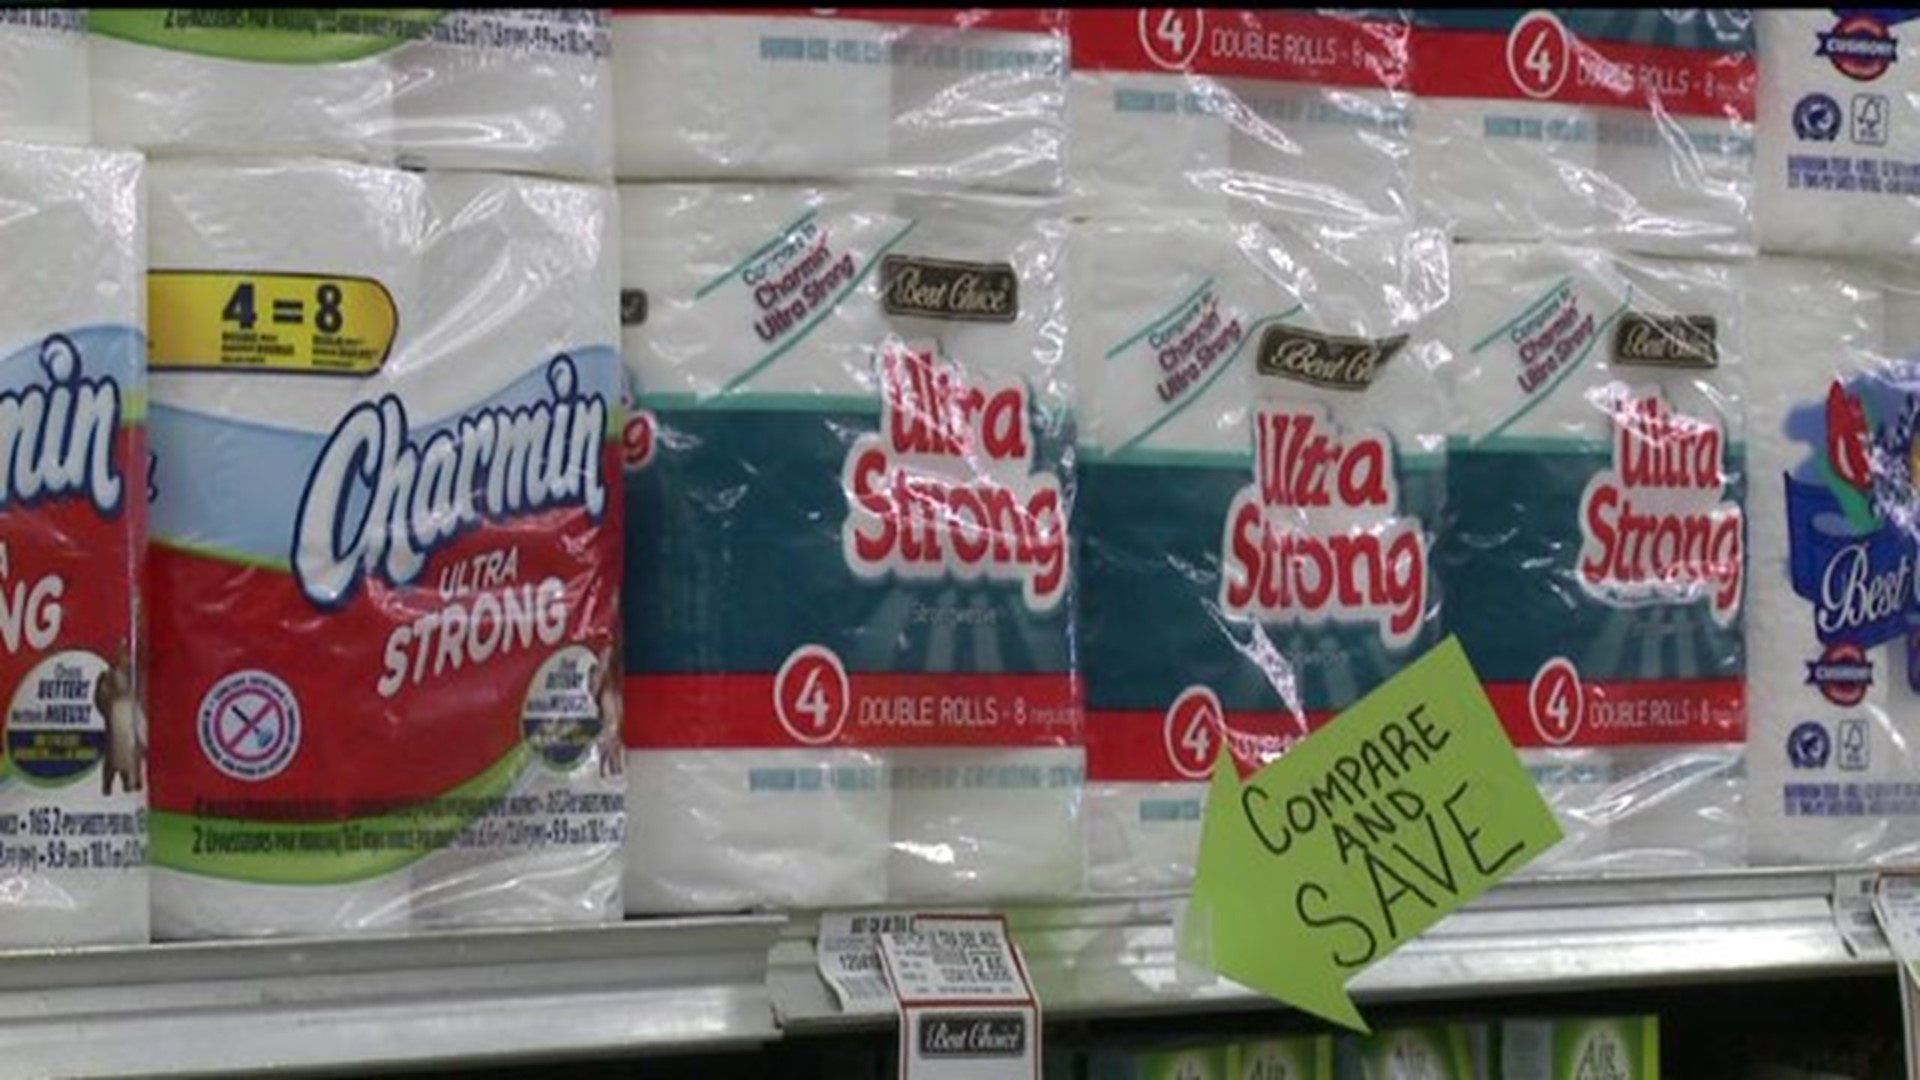 Wipe local: Toilet paper can boost local economy